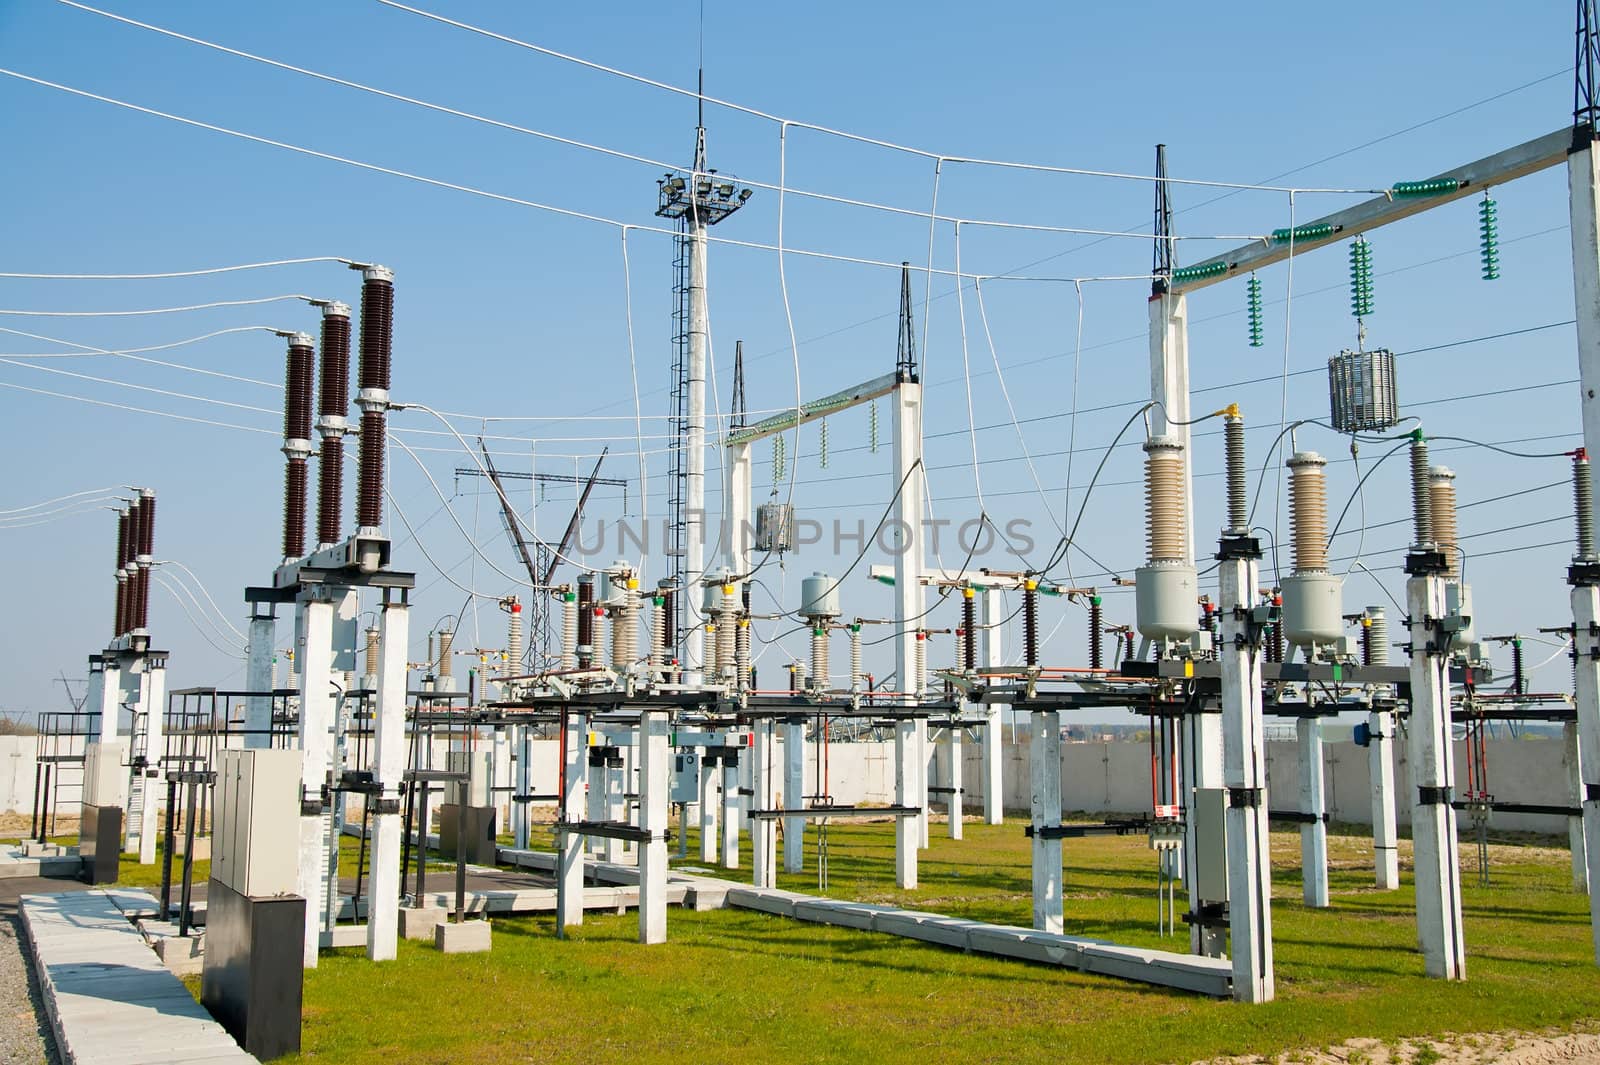 general view to high-voltage substation with switches and disconnectors